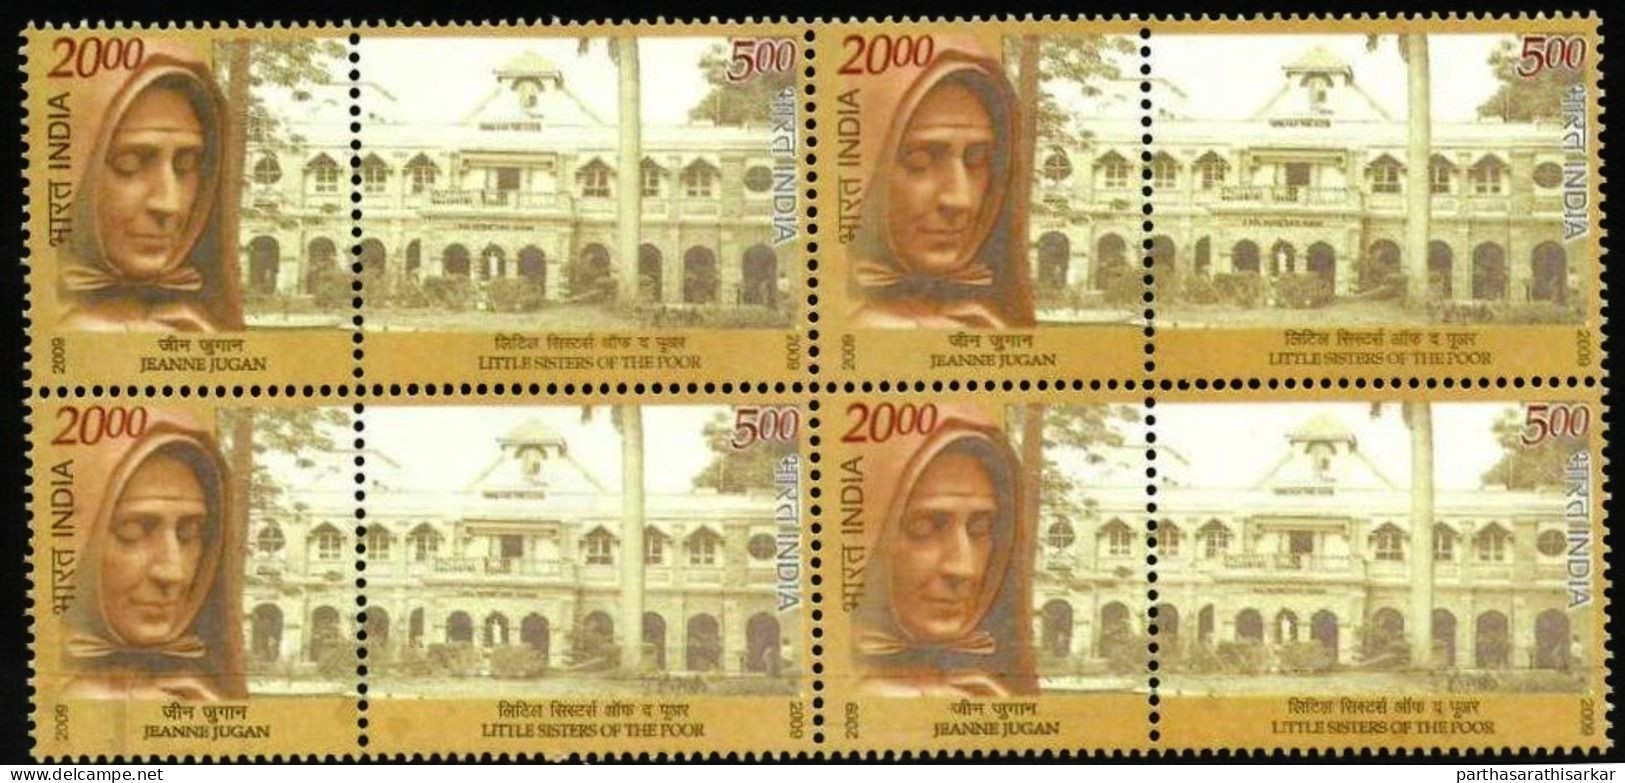 INDIA 2009 LITTLE SISTERS OF POOR COMPLETE SE-TANENT BLOCK OF 4 MNH RARE - Nuevos